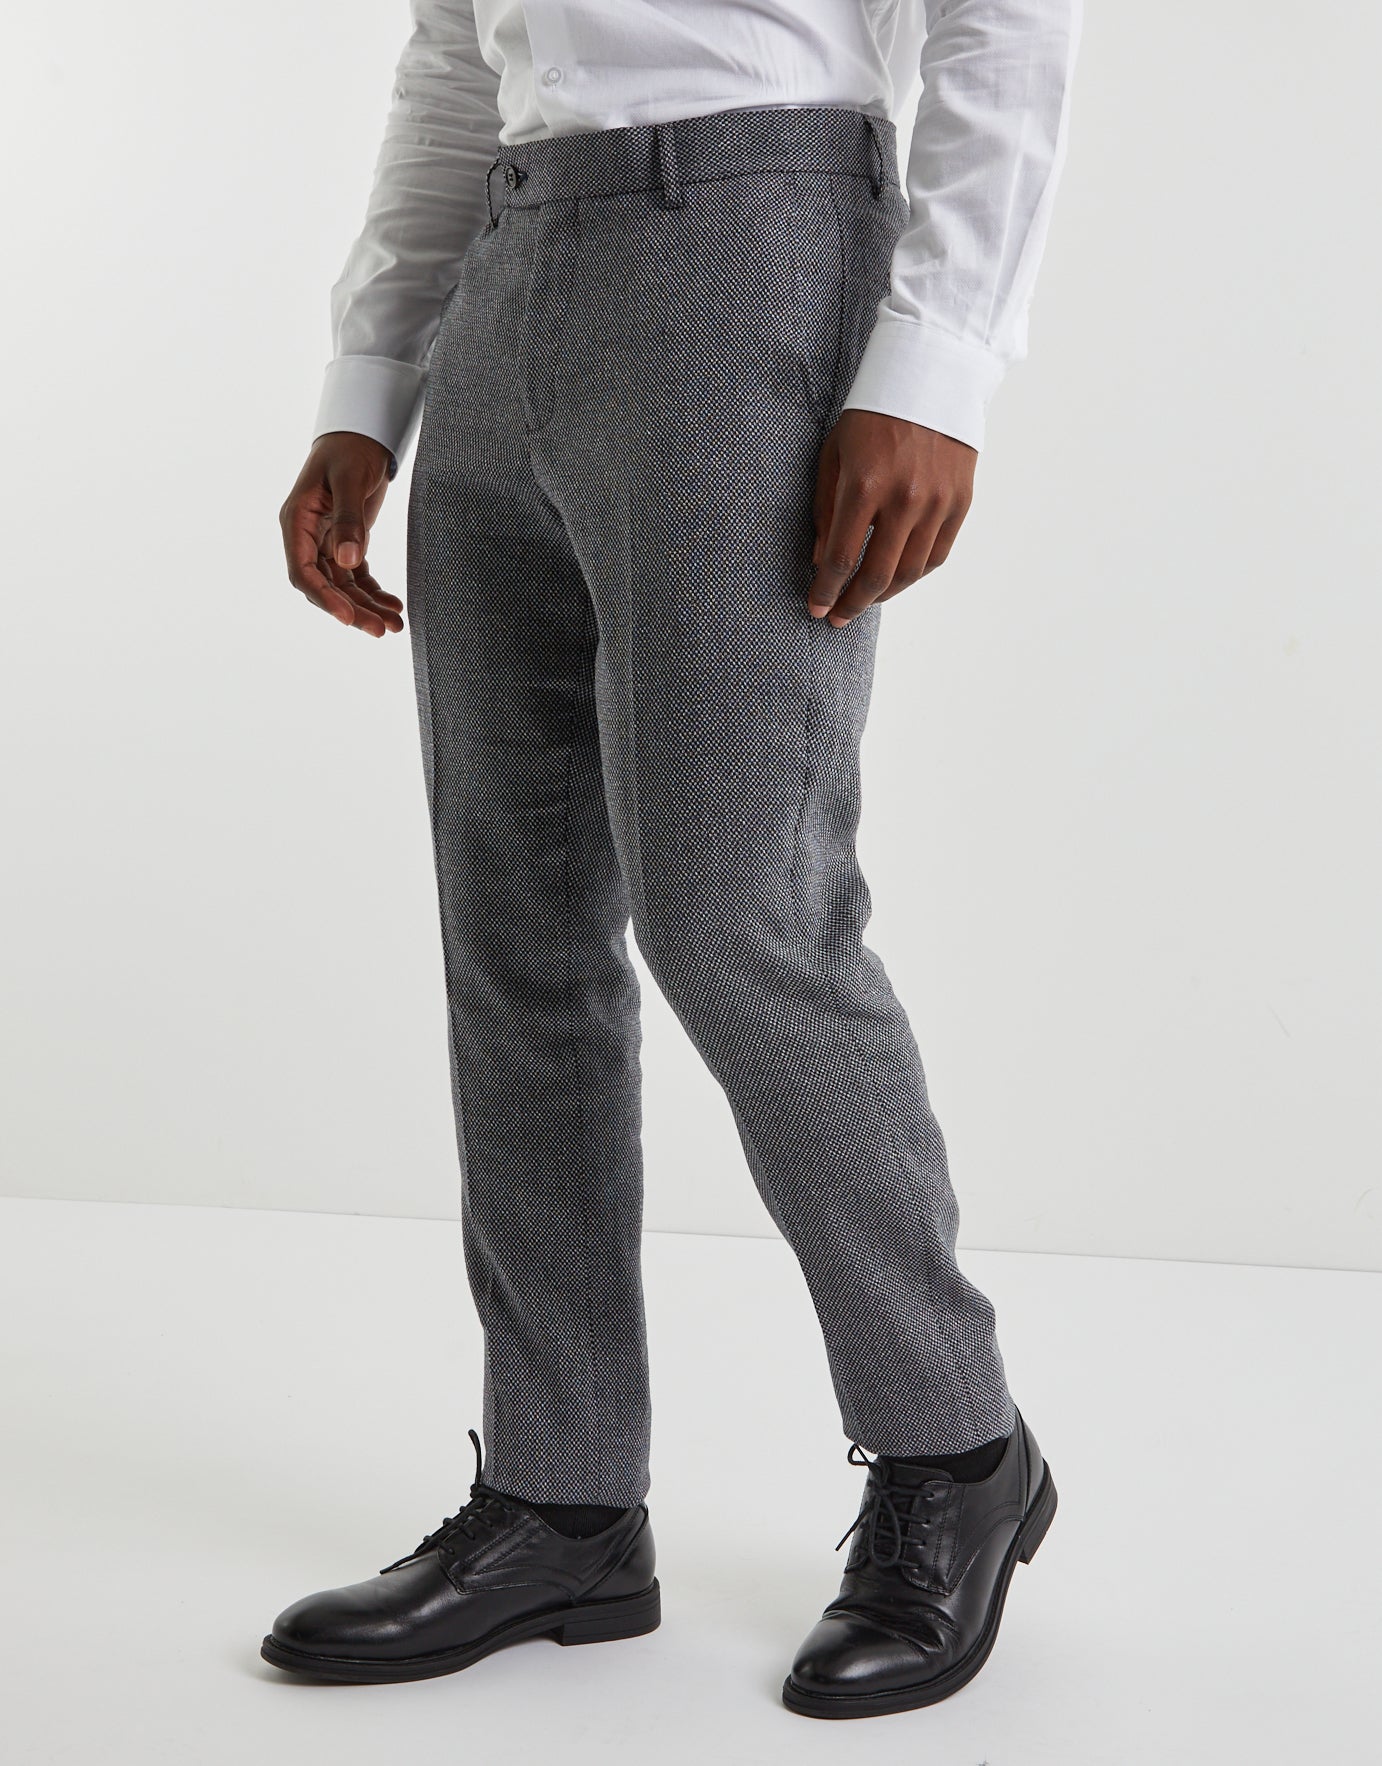 Gibson London | Grey Texture Slim Fit Trouser | SuitDirect.co.uk